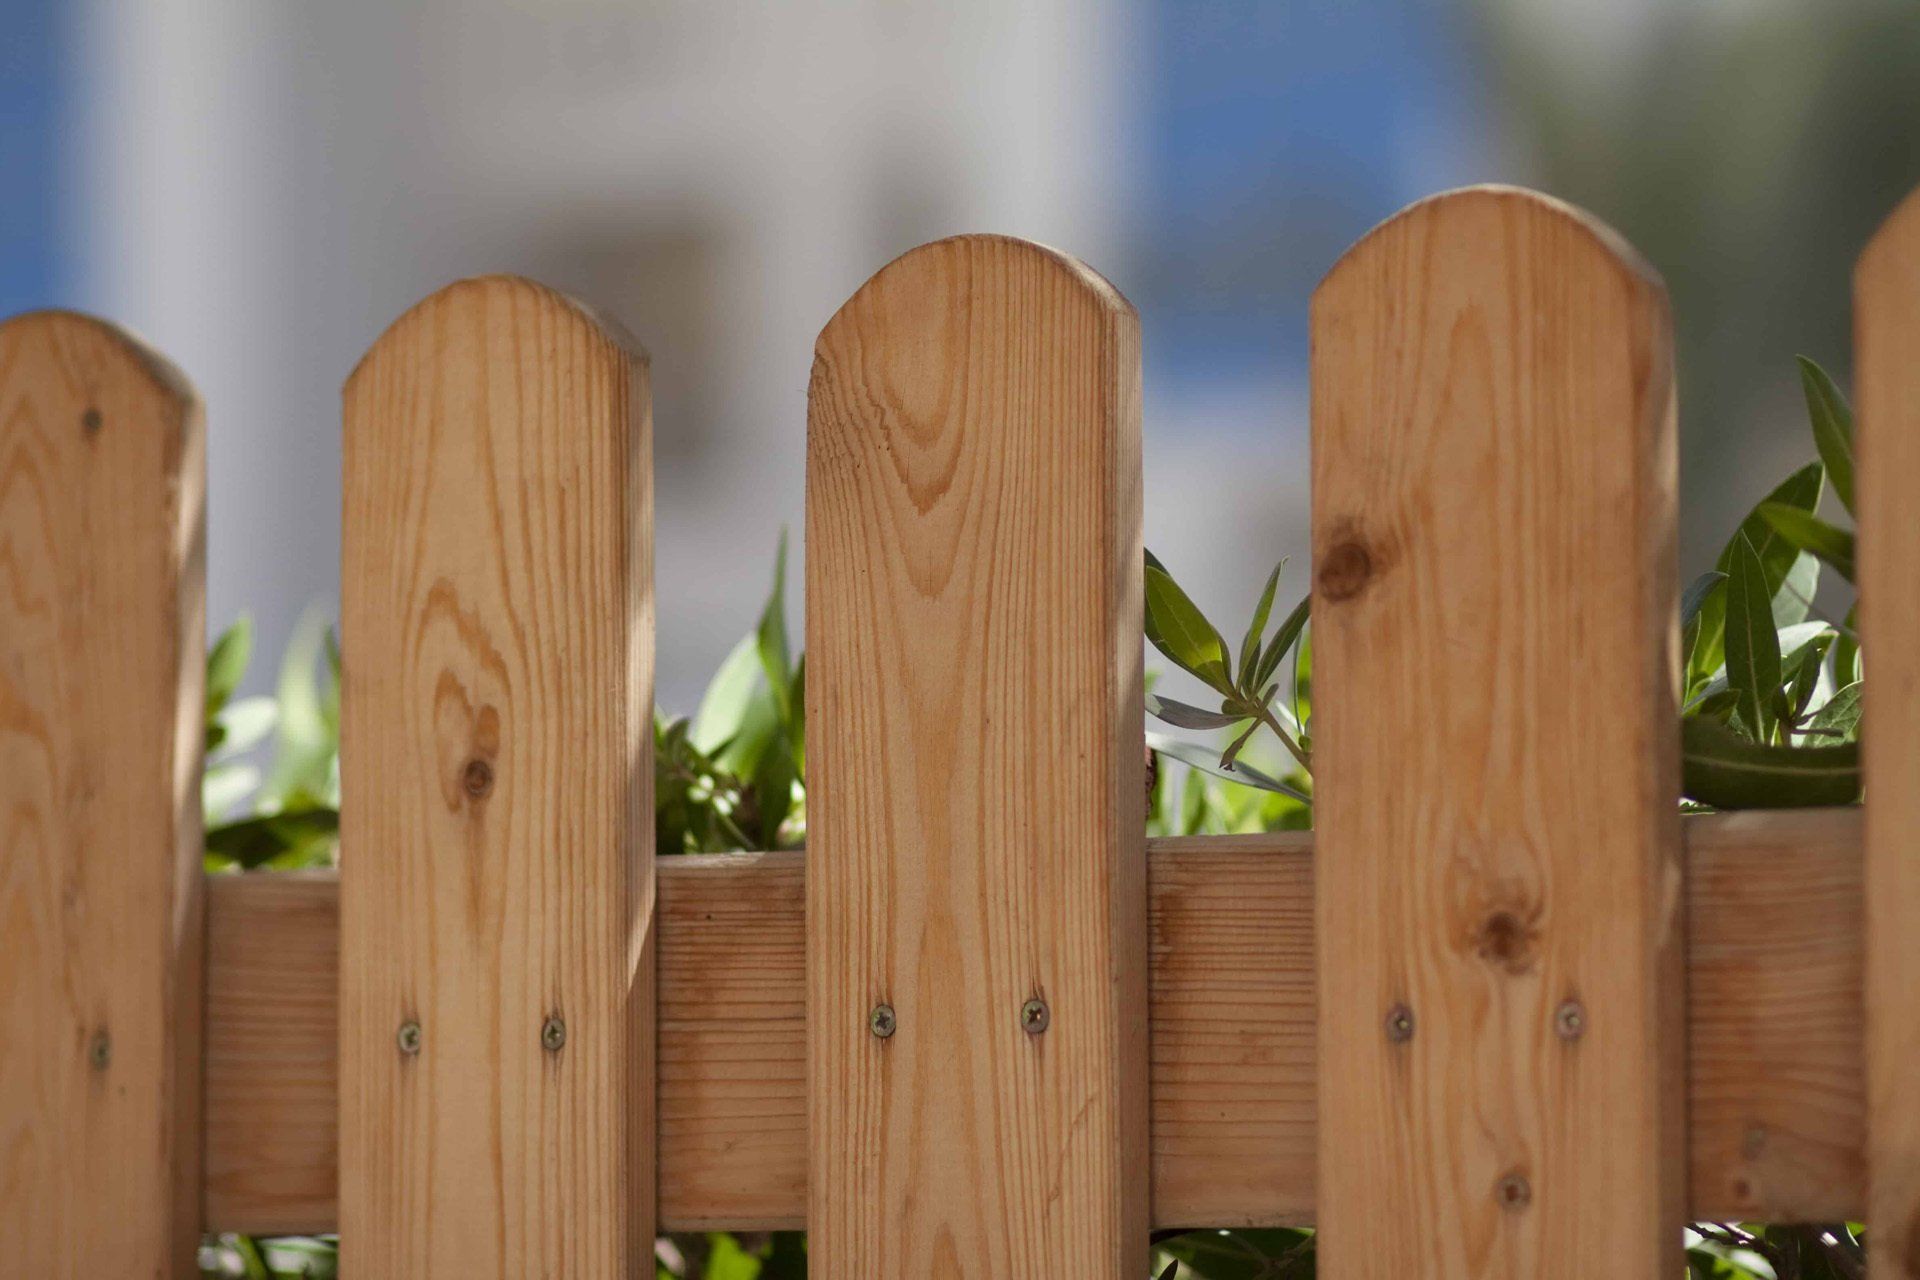 Timber fence installation